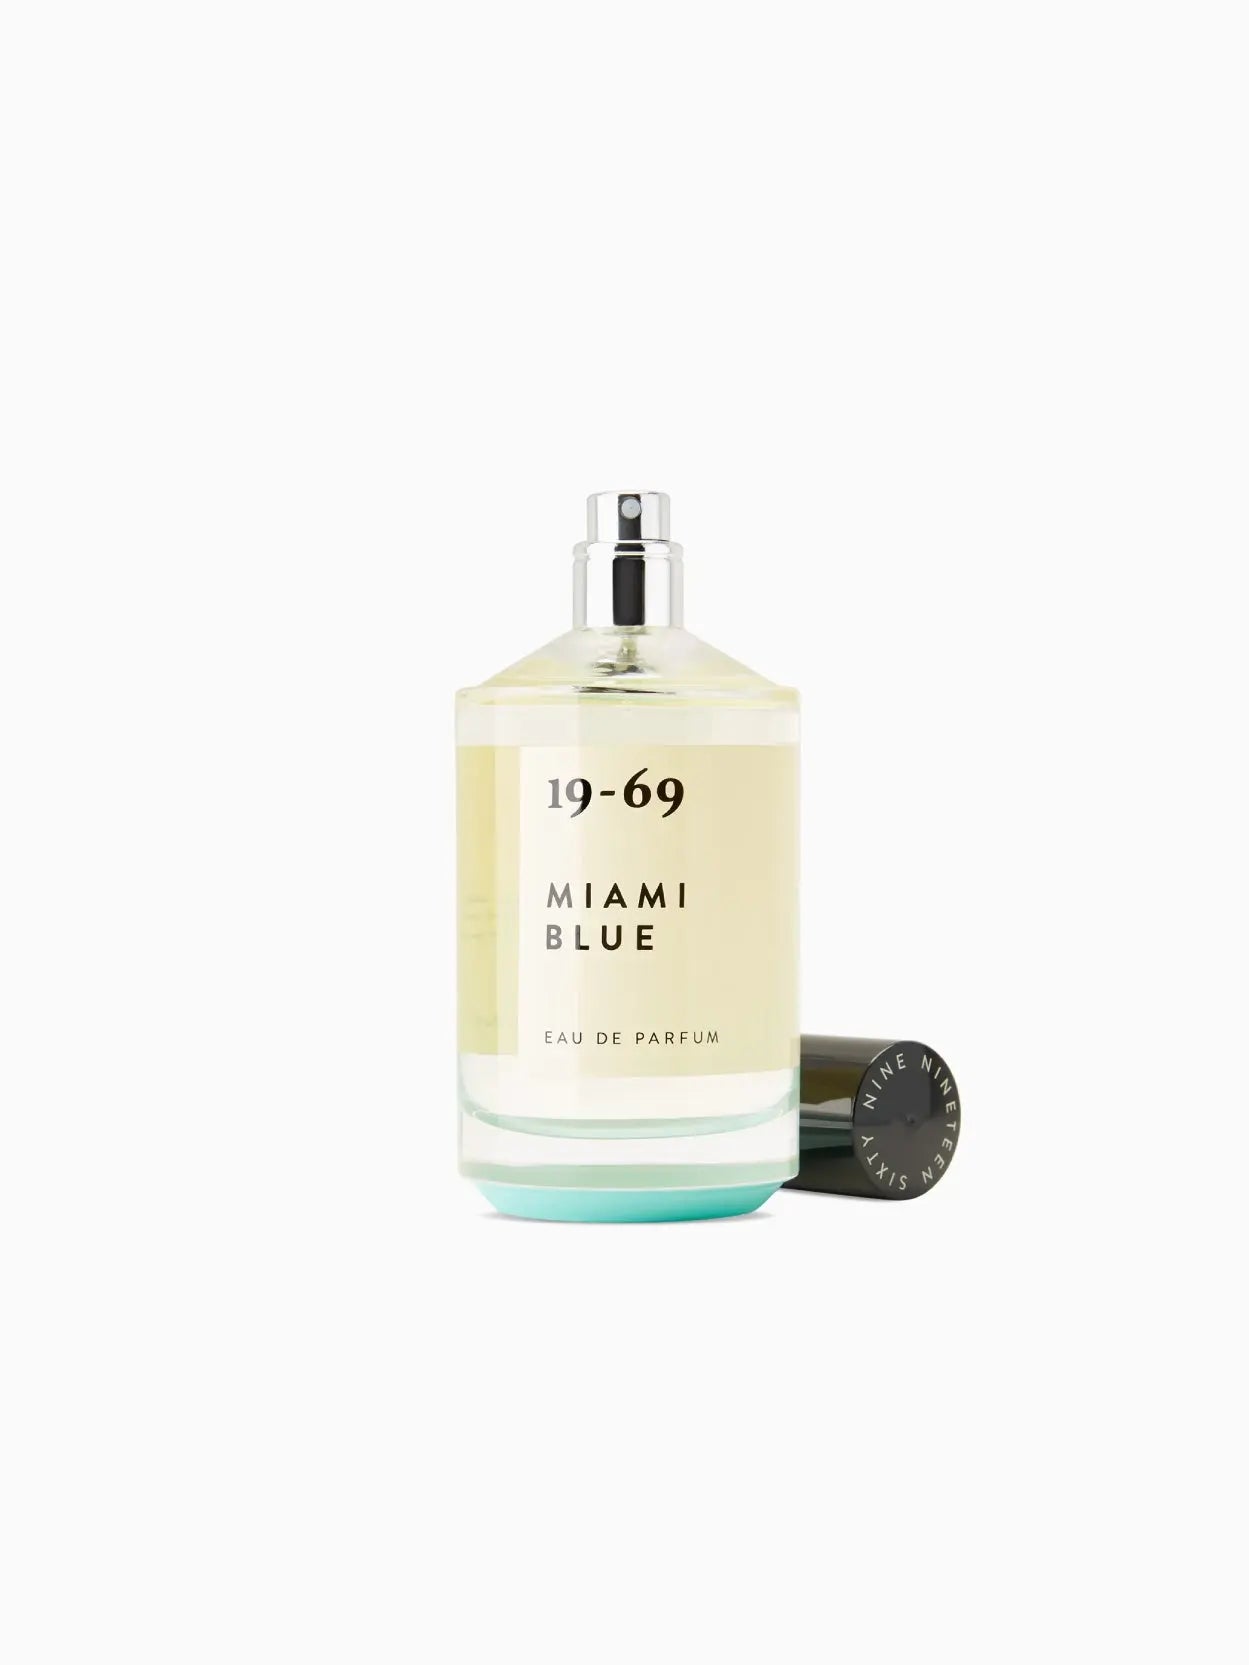 A clear glass bottle of perfume labeled "19-69 Miami Blue 100ml" with black text. The bottle, available at Bassalstore, has a black cap and contains a light yellow liquid. The text below the name reads "EAU DE PARFUM." The background is white.